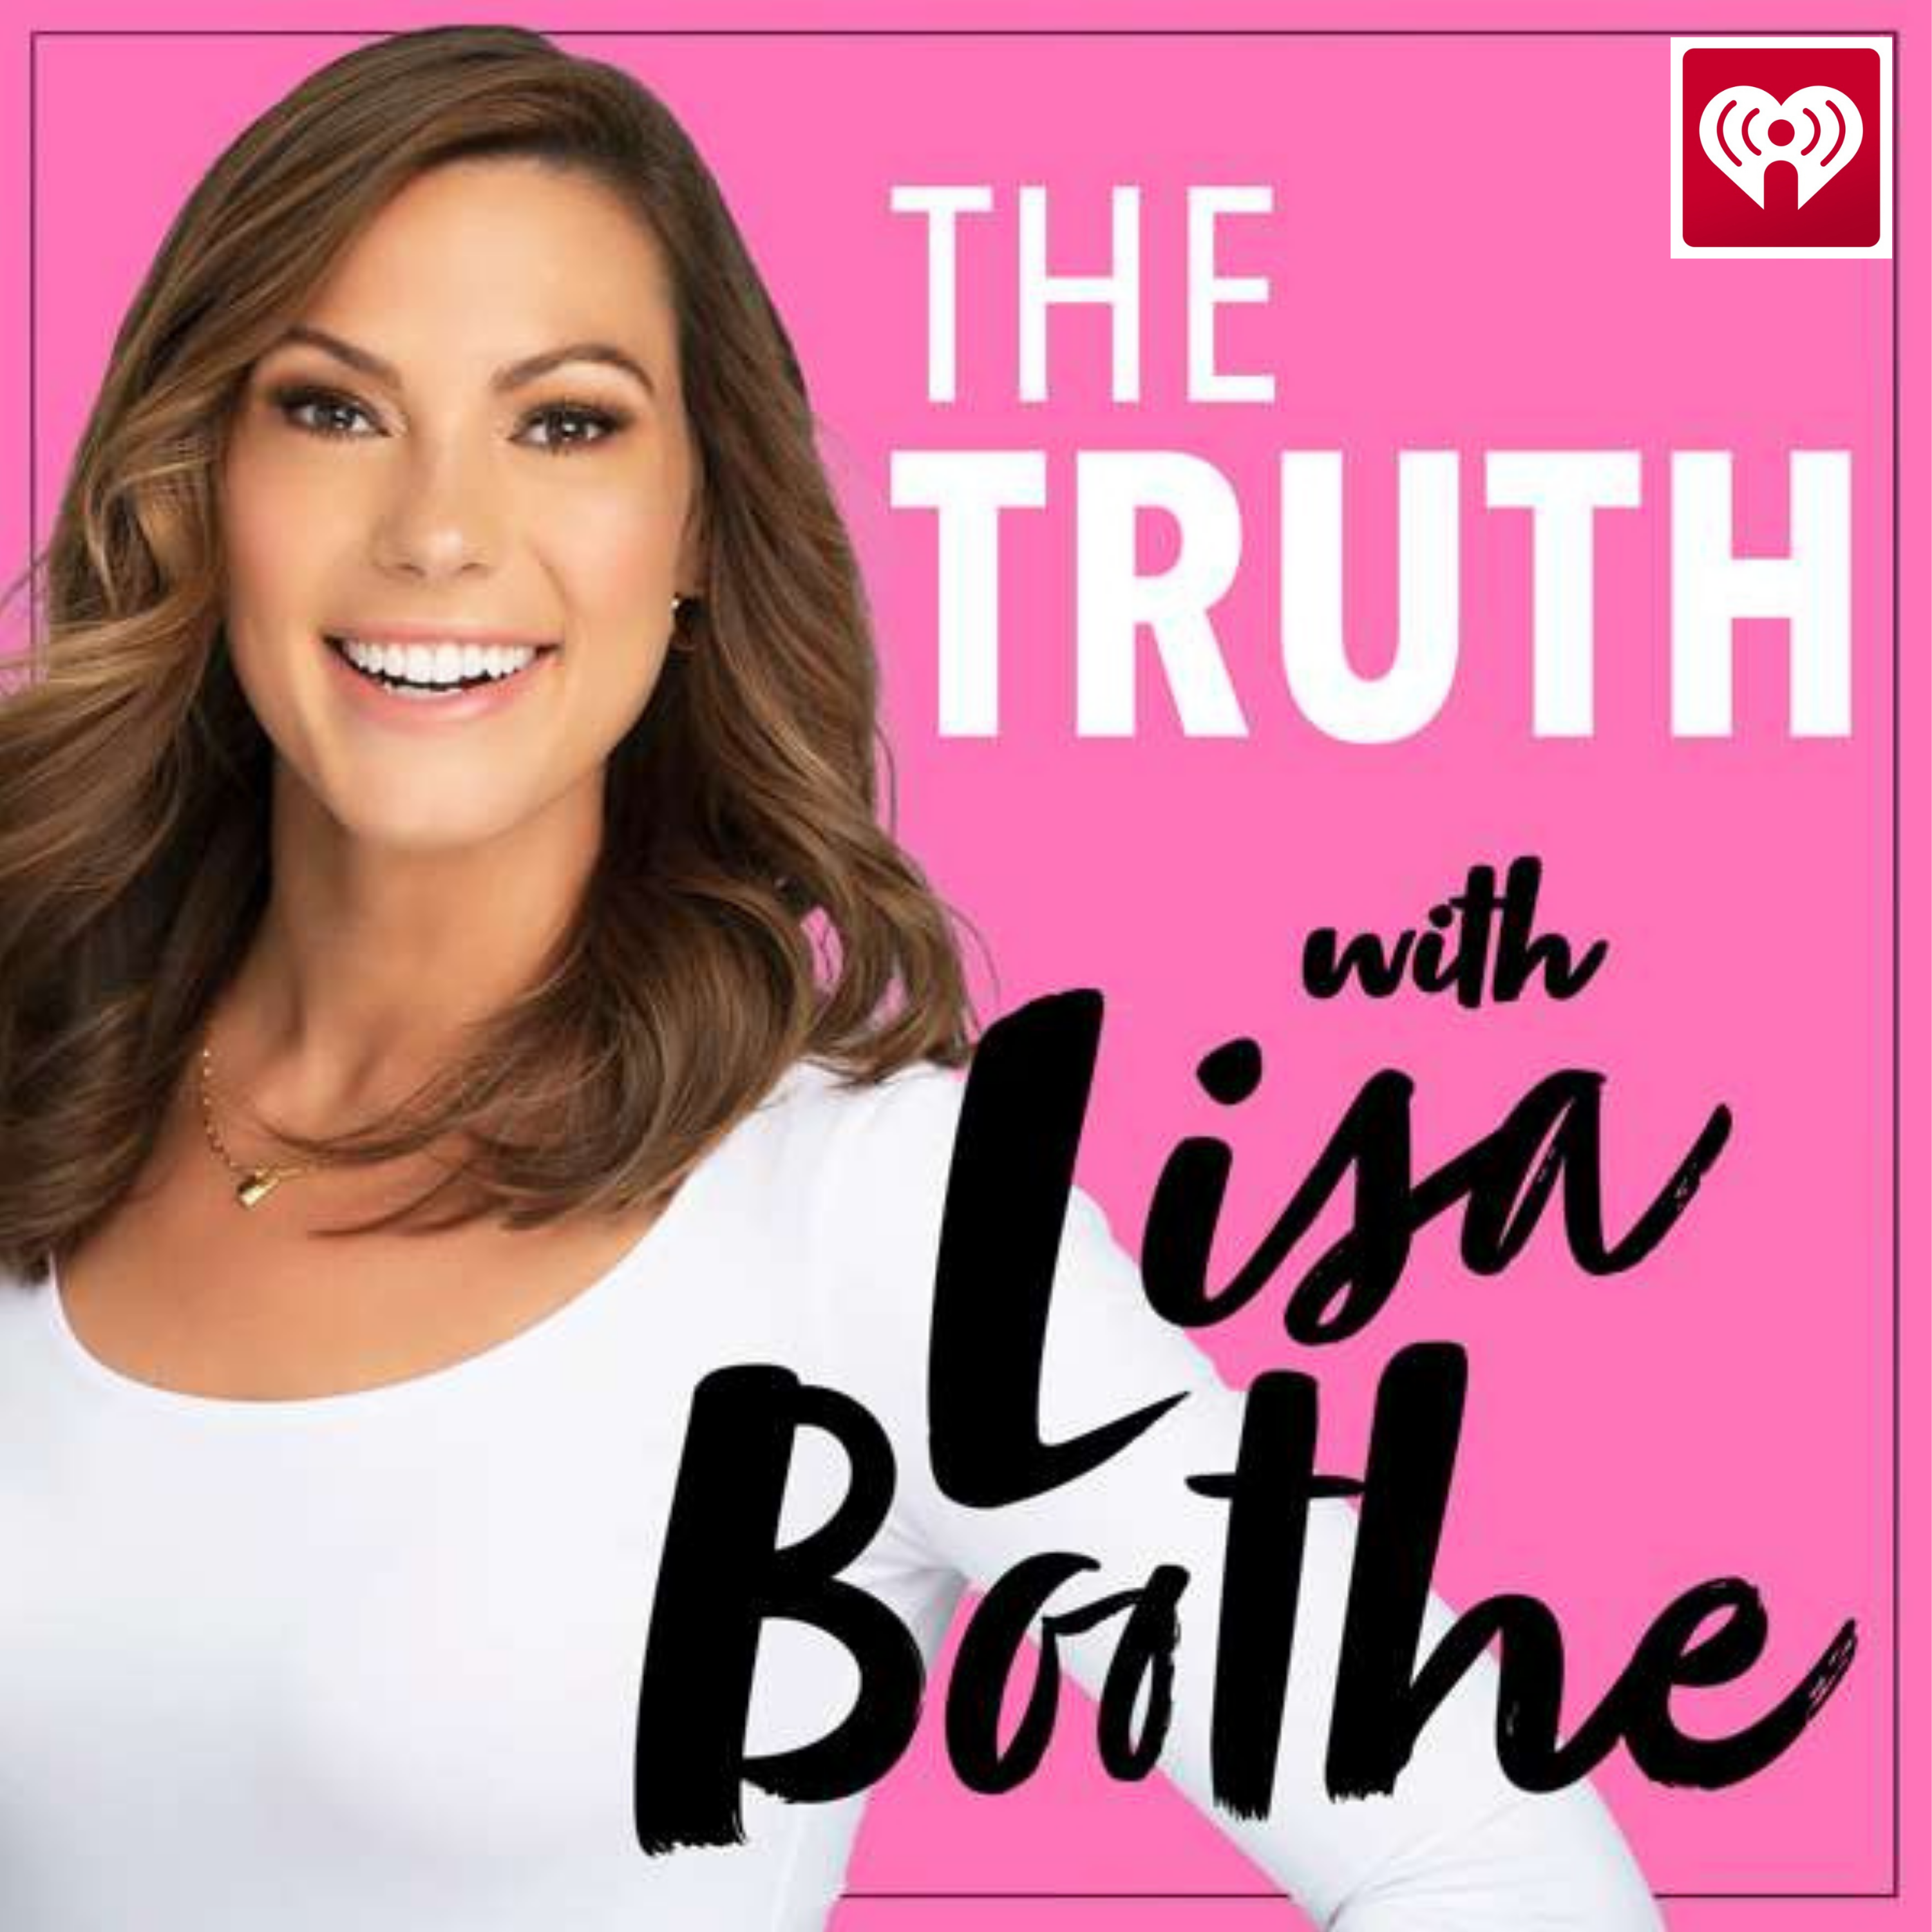 The Truth with Lisa Boothe: The Left's Profit Motive Behind the Border Crisis with Rep. Jim Banks